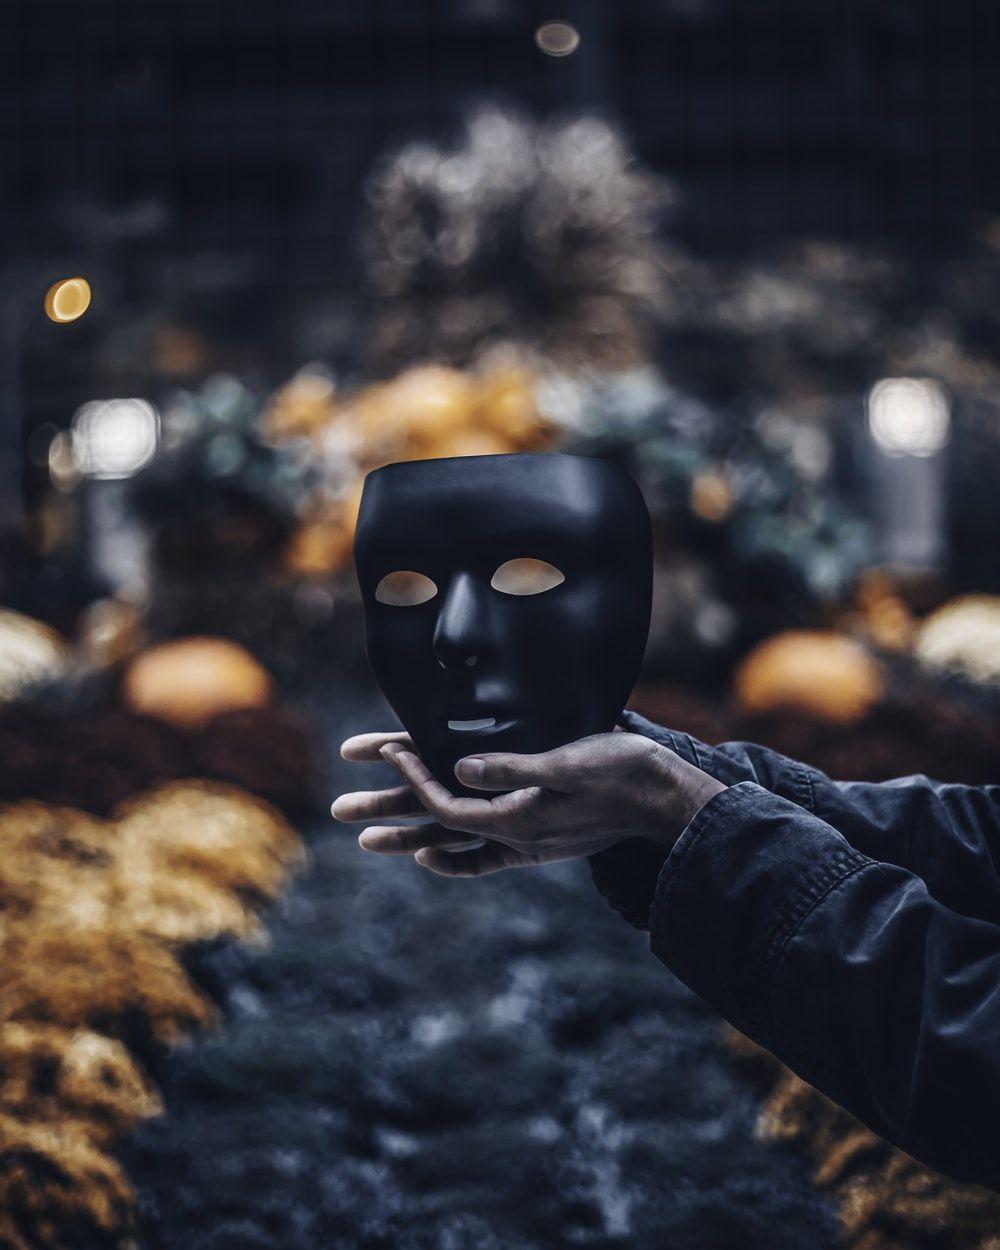 Black Mask Picture. Download Free Image